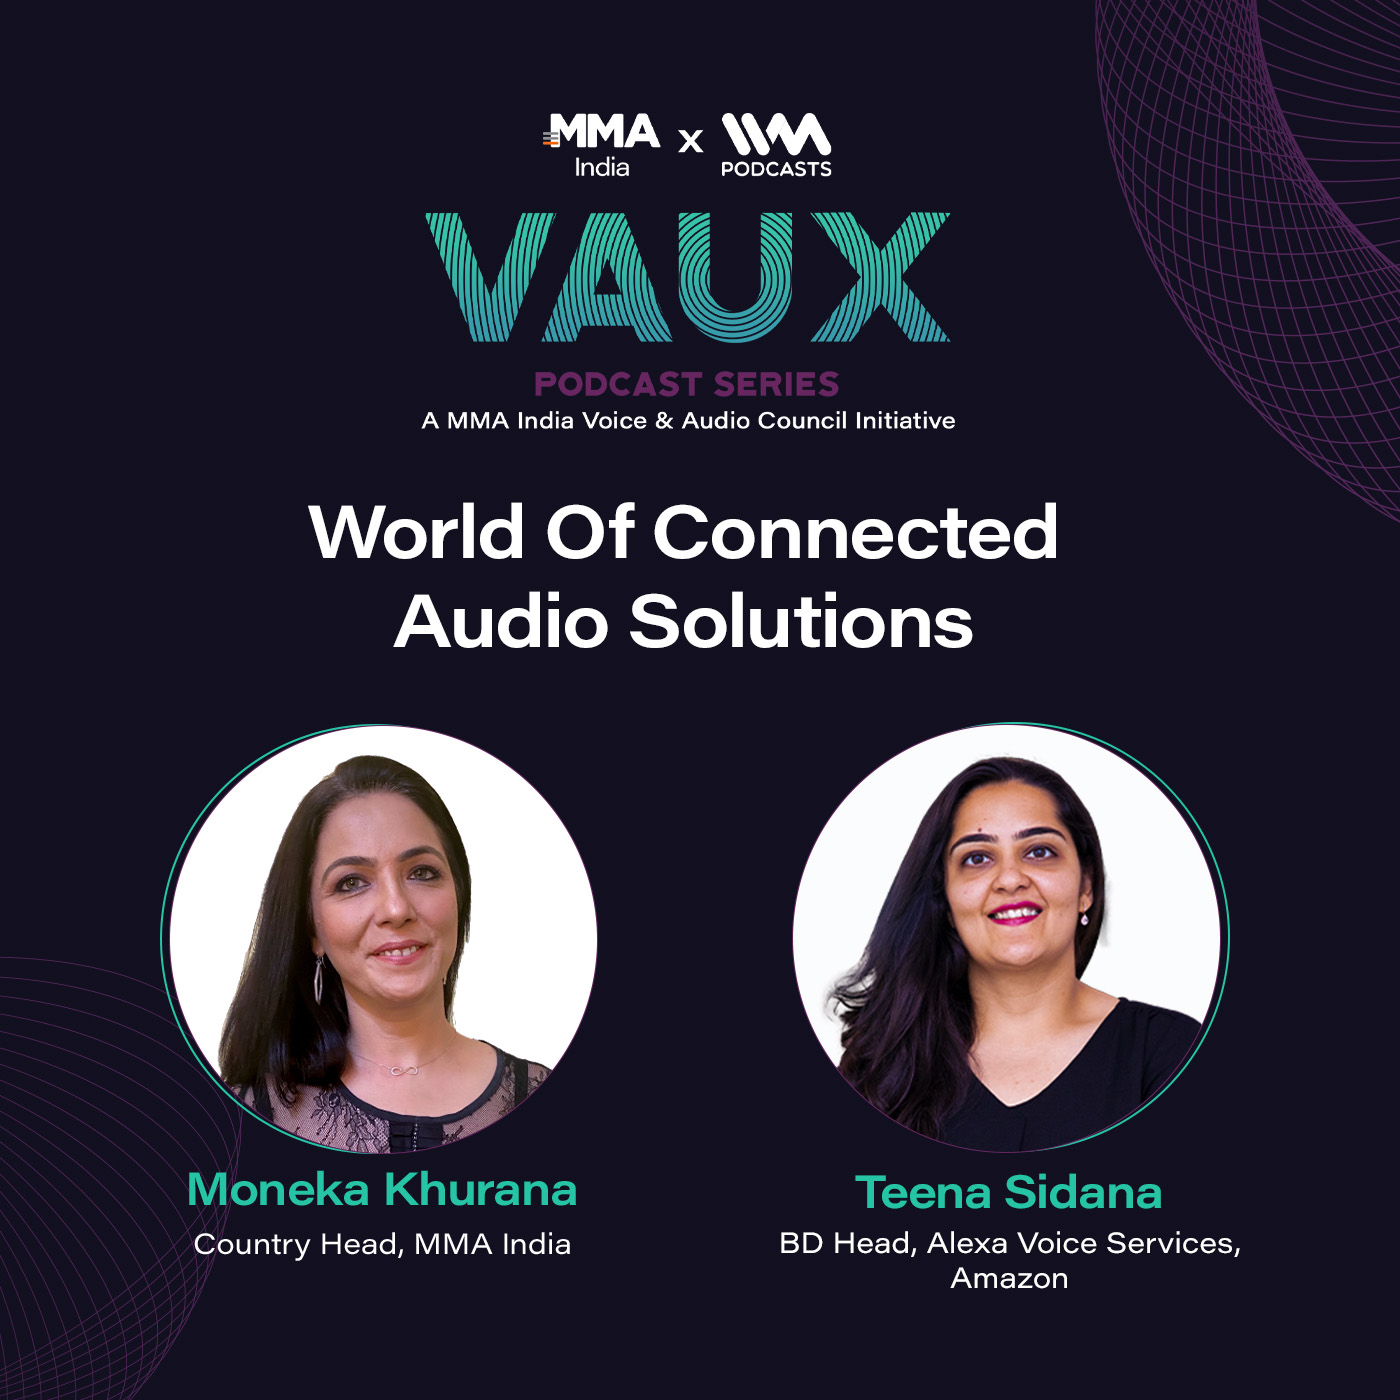 World of Connected Audio Solutions